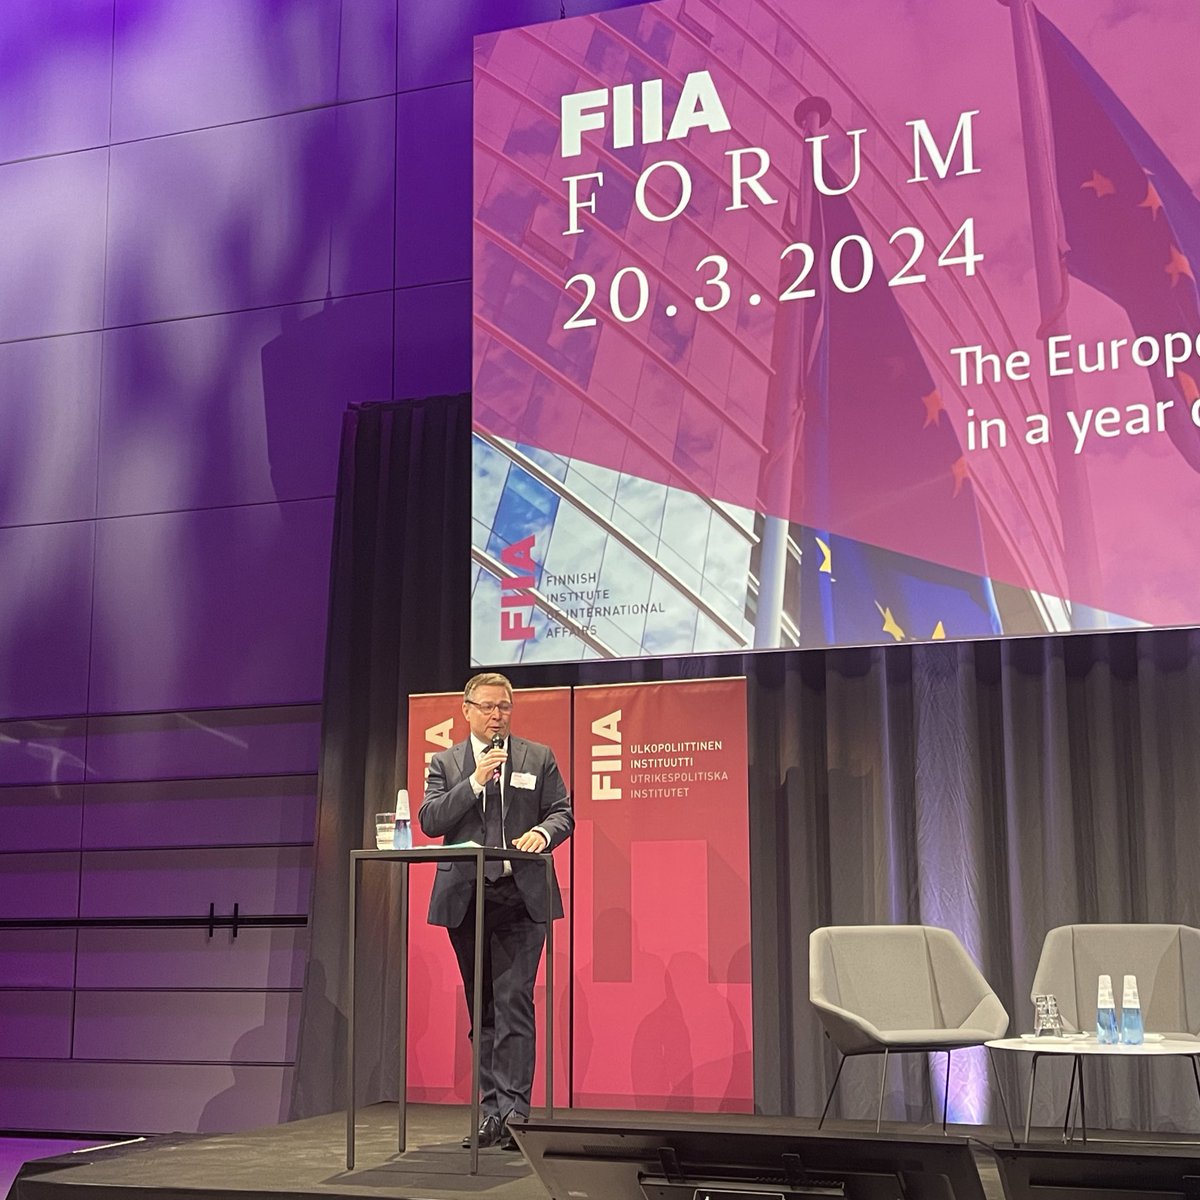 It’s a wrap! 

The closing remarks by FIIA’s Programme Director @JuhaJokela1 conclude the #FIIAForum2024. 🇪🇺

Thank you to all the excellent speakers and the audience!